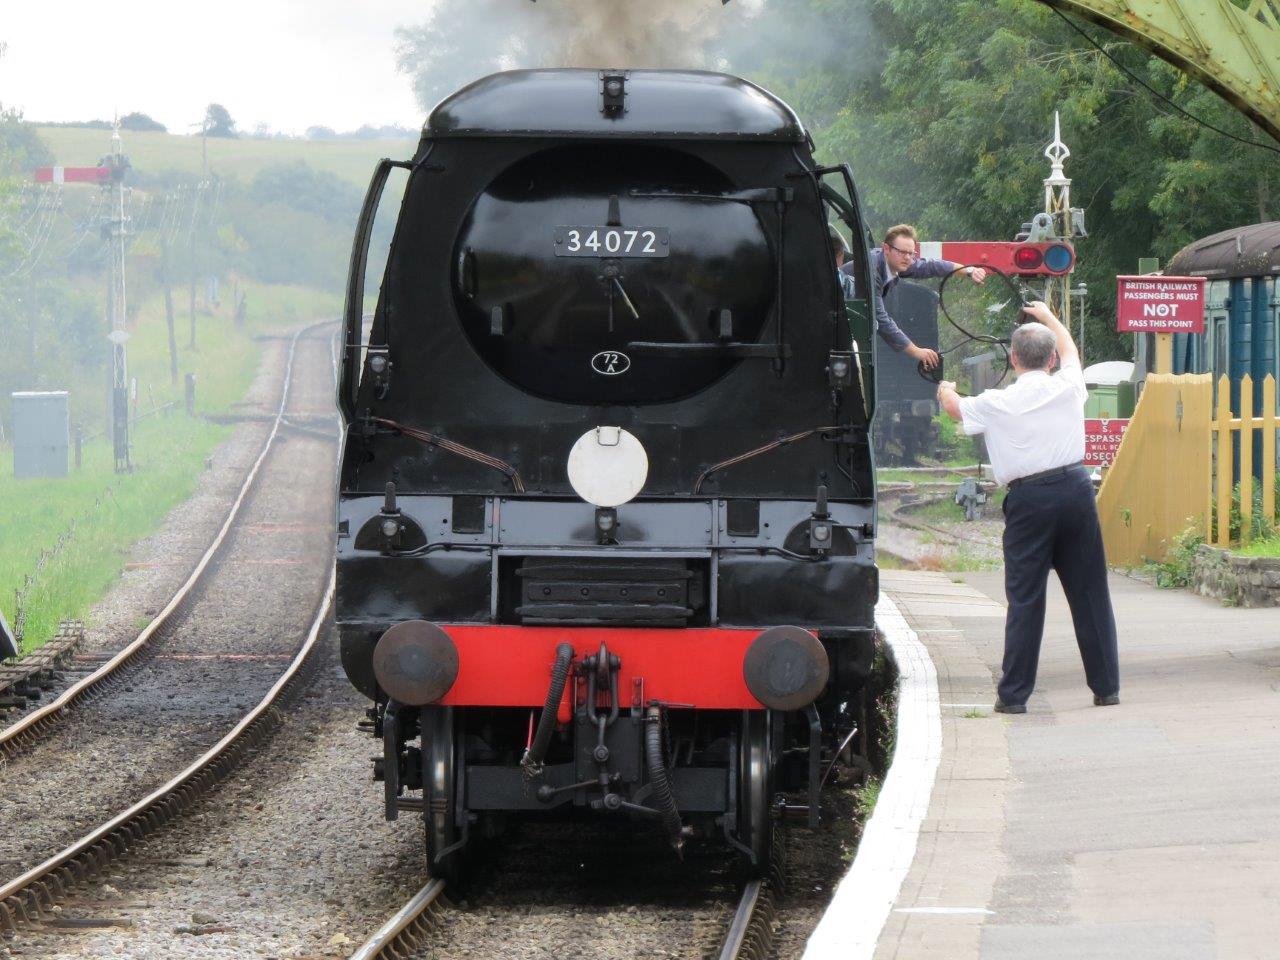 34072 at Corfe Castle in 2020